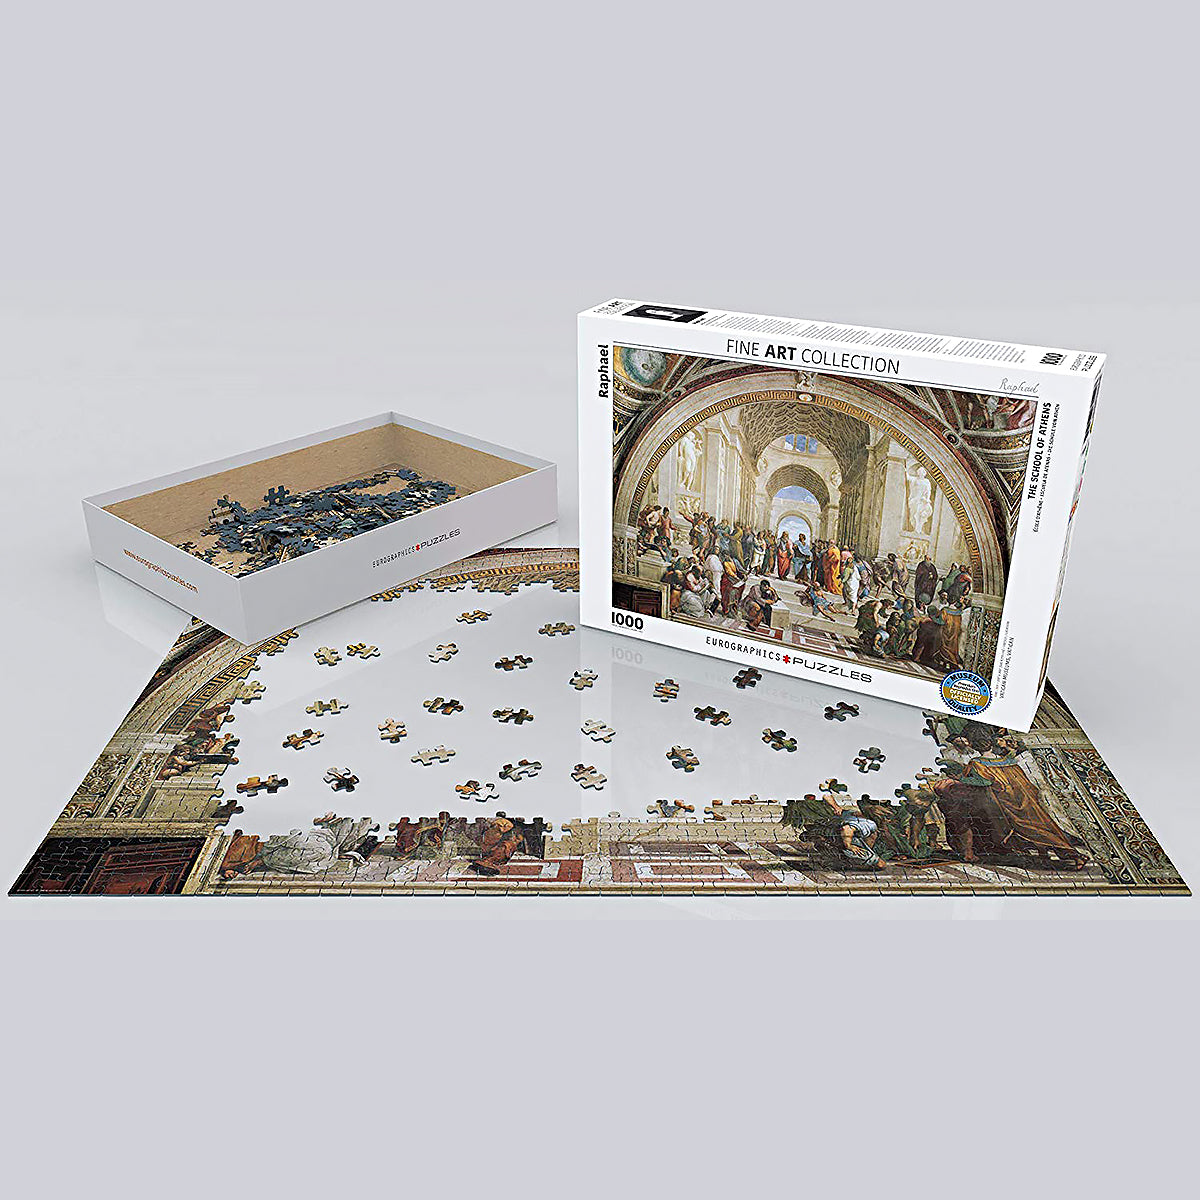 A stunning example of fine art transformed into a challenging puzzle - the 1000-piece Raphael The School of Athens Jigsaw Puzzle.